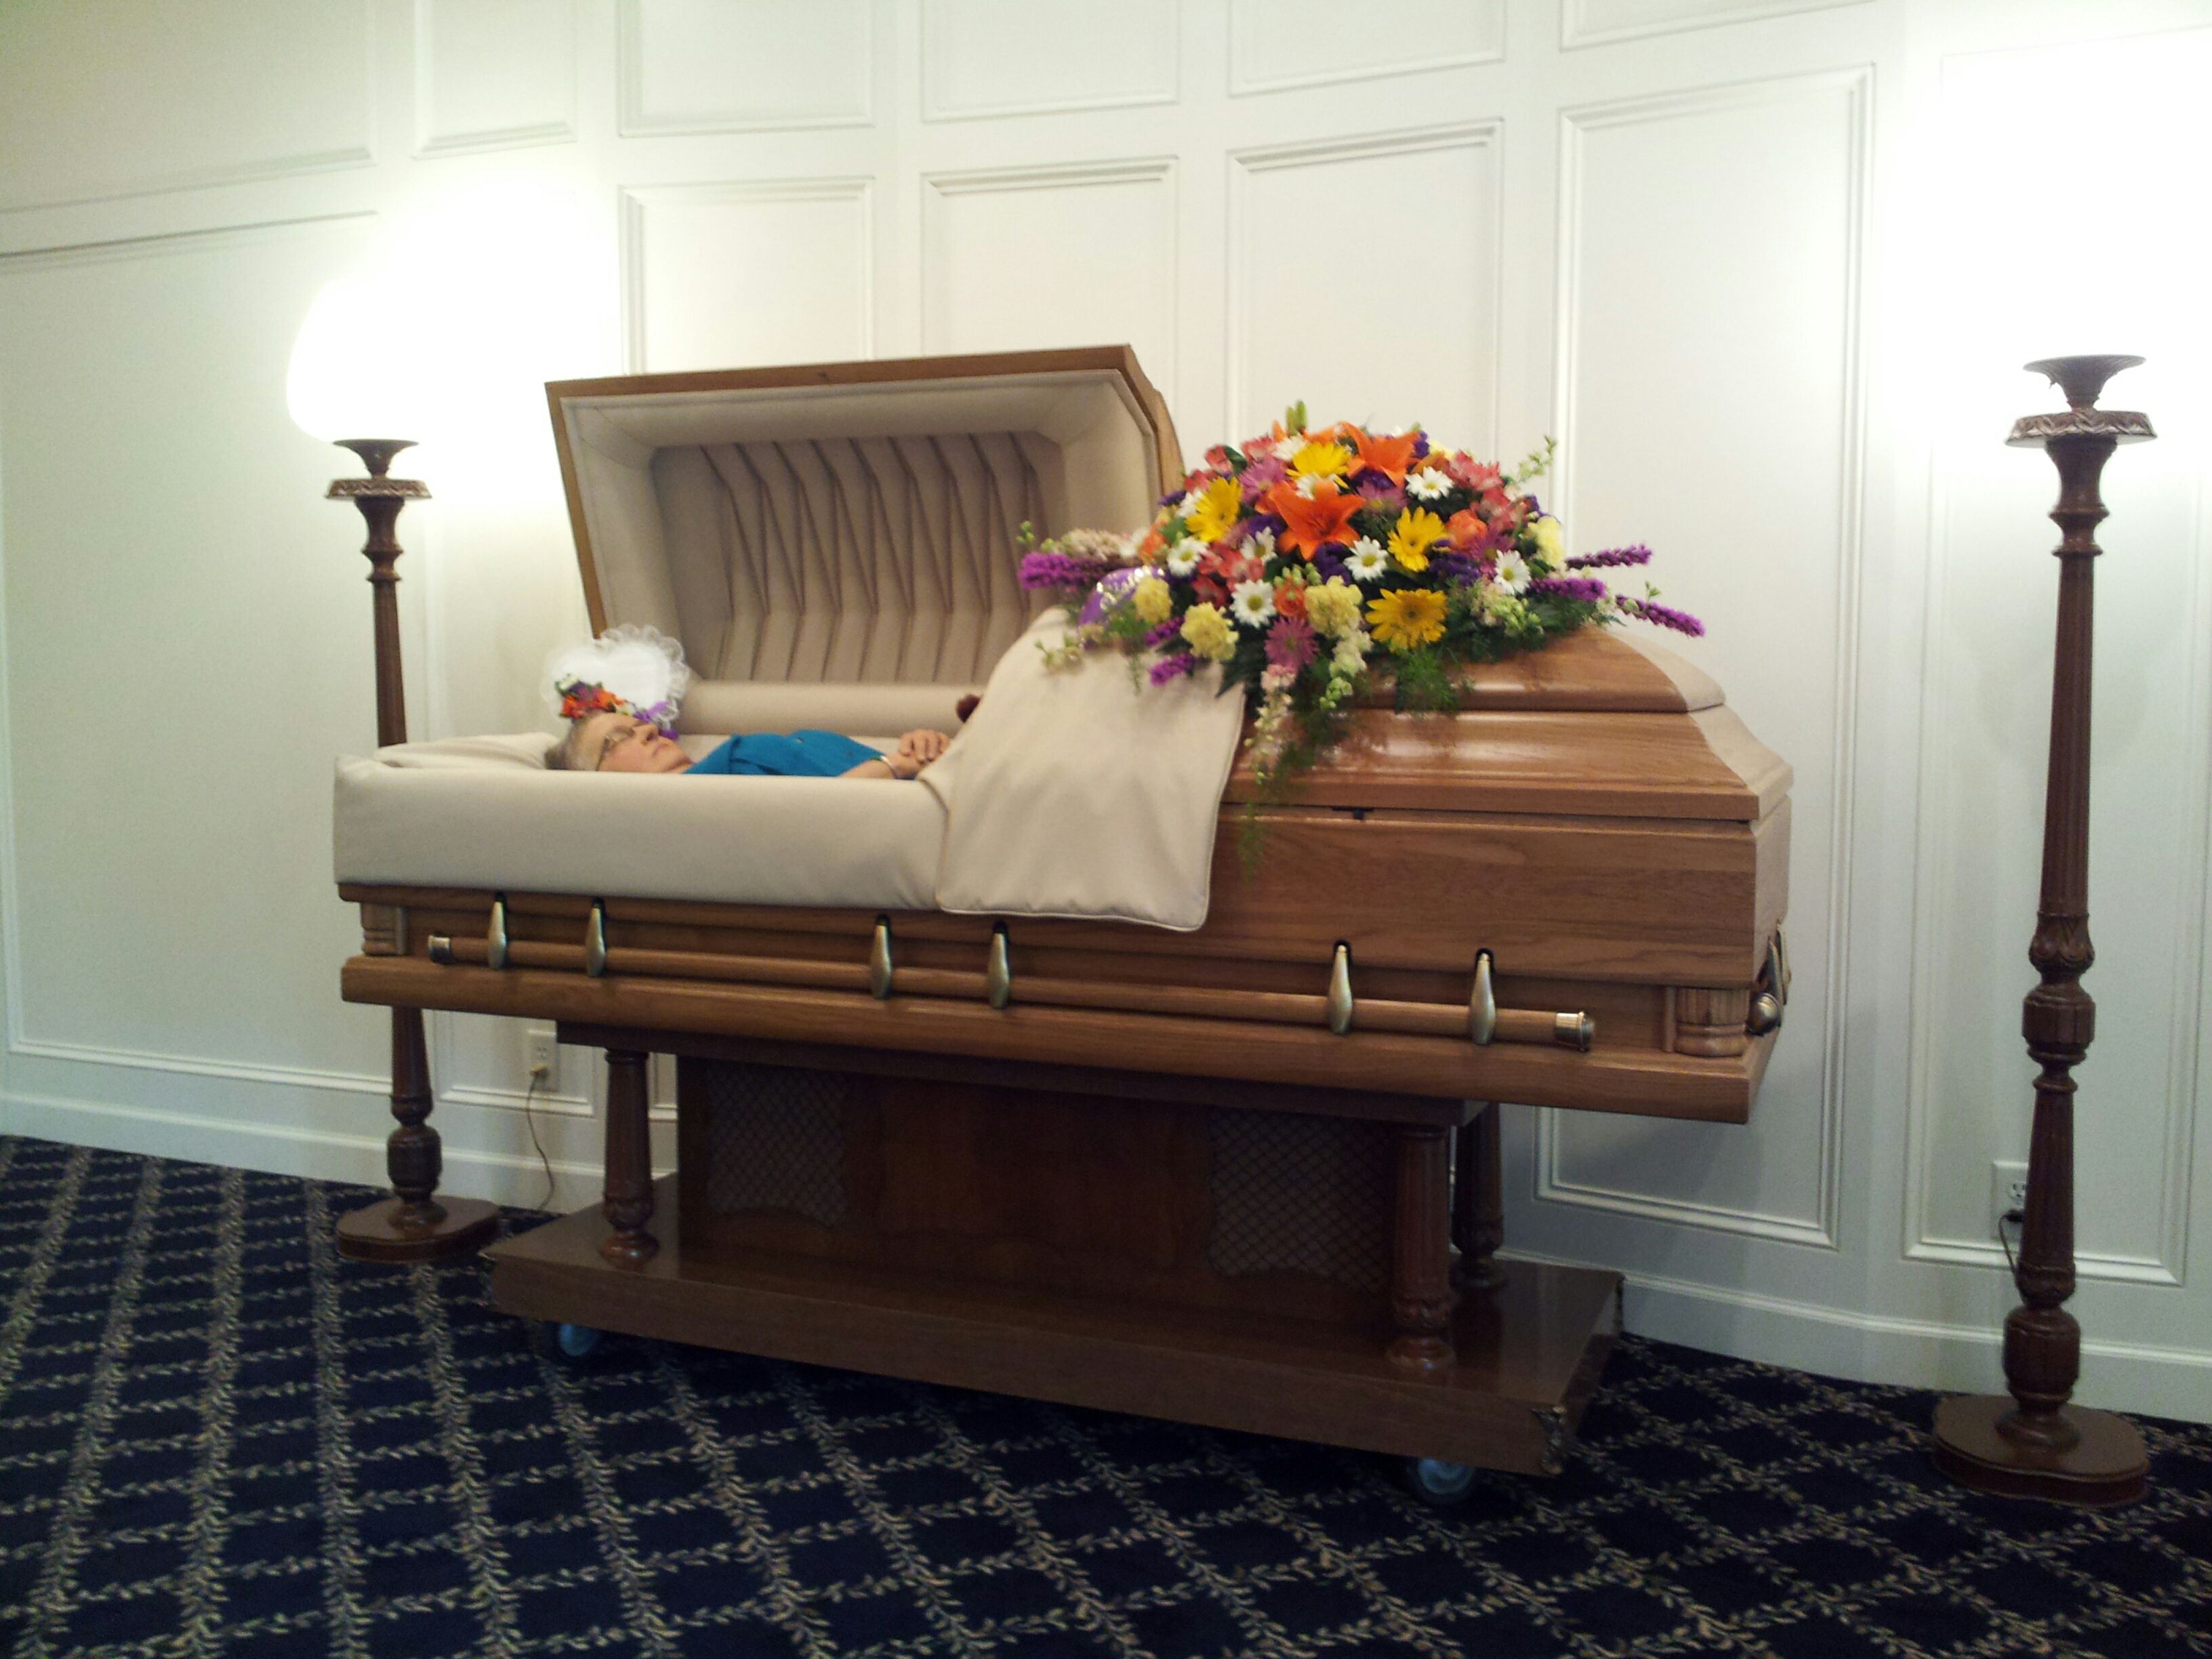 George f.doherty sons funeral homes